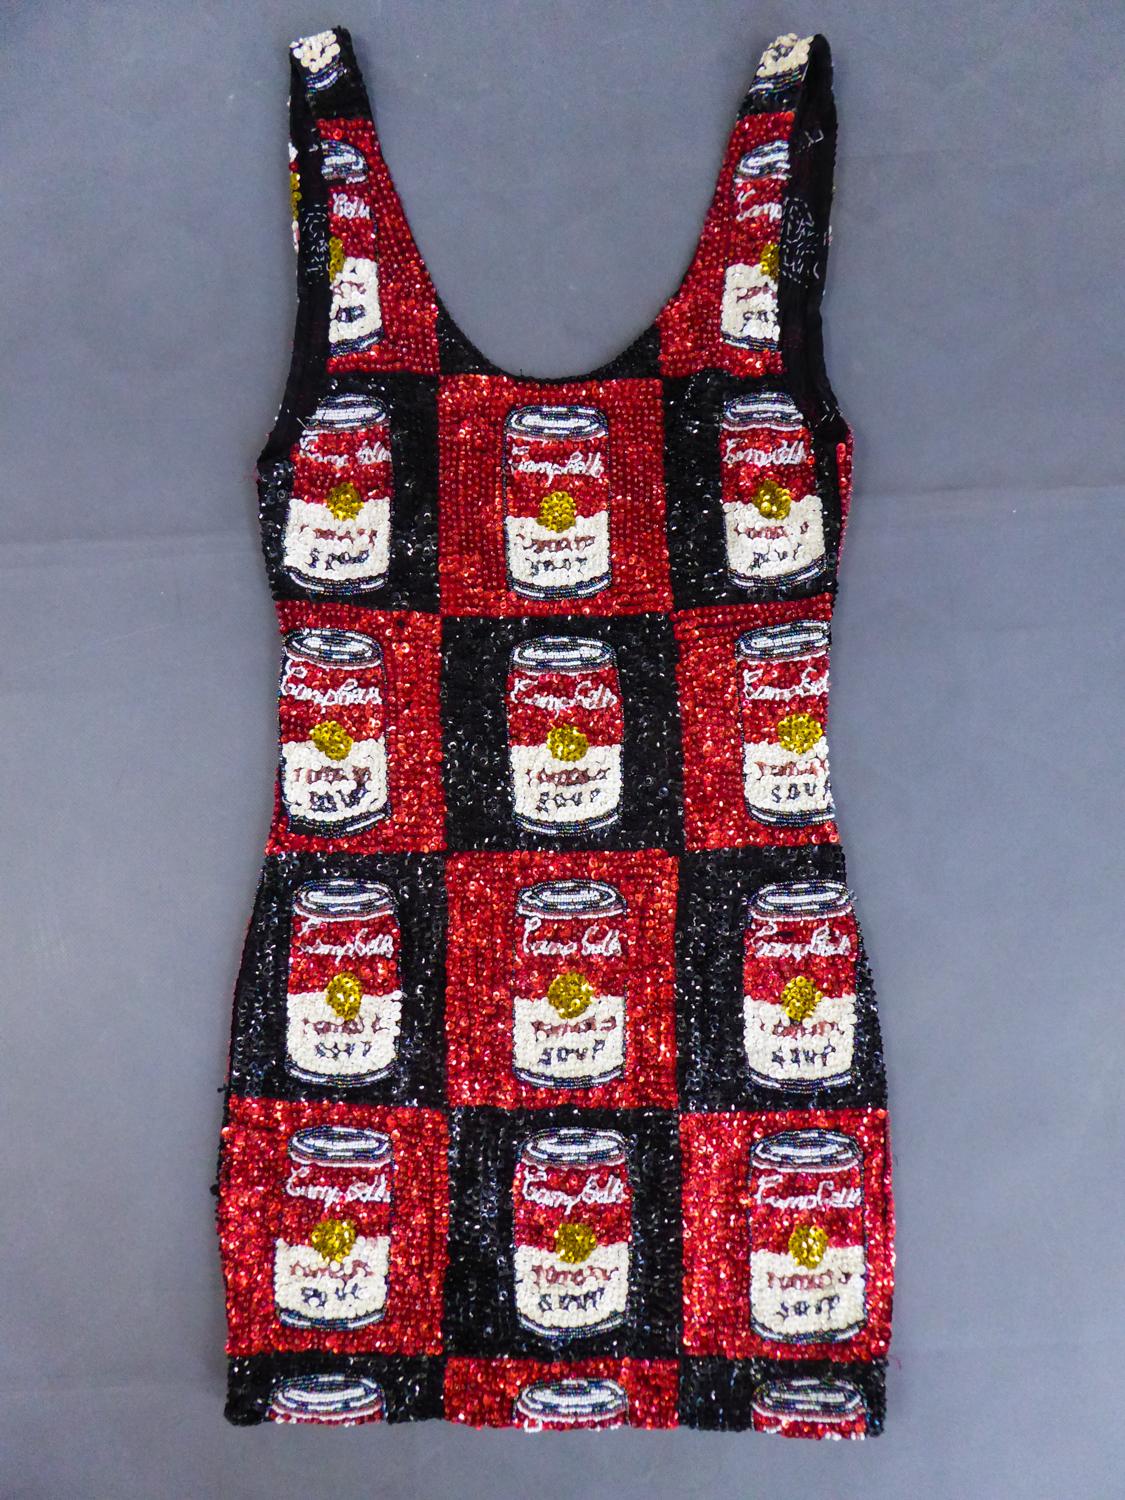 Circa 1990
England

A cocktail lycra mini dress fully embroidered with red and black checkered sequins representing one of the most famous work of Andy Warhol, Campbell’s soup cans, created in 1962. Sleeveless low-cut neckline and backless, this